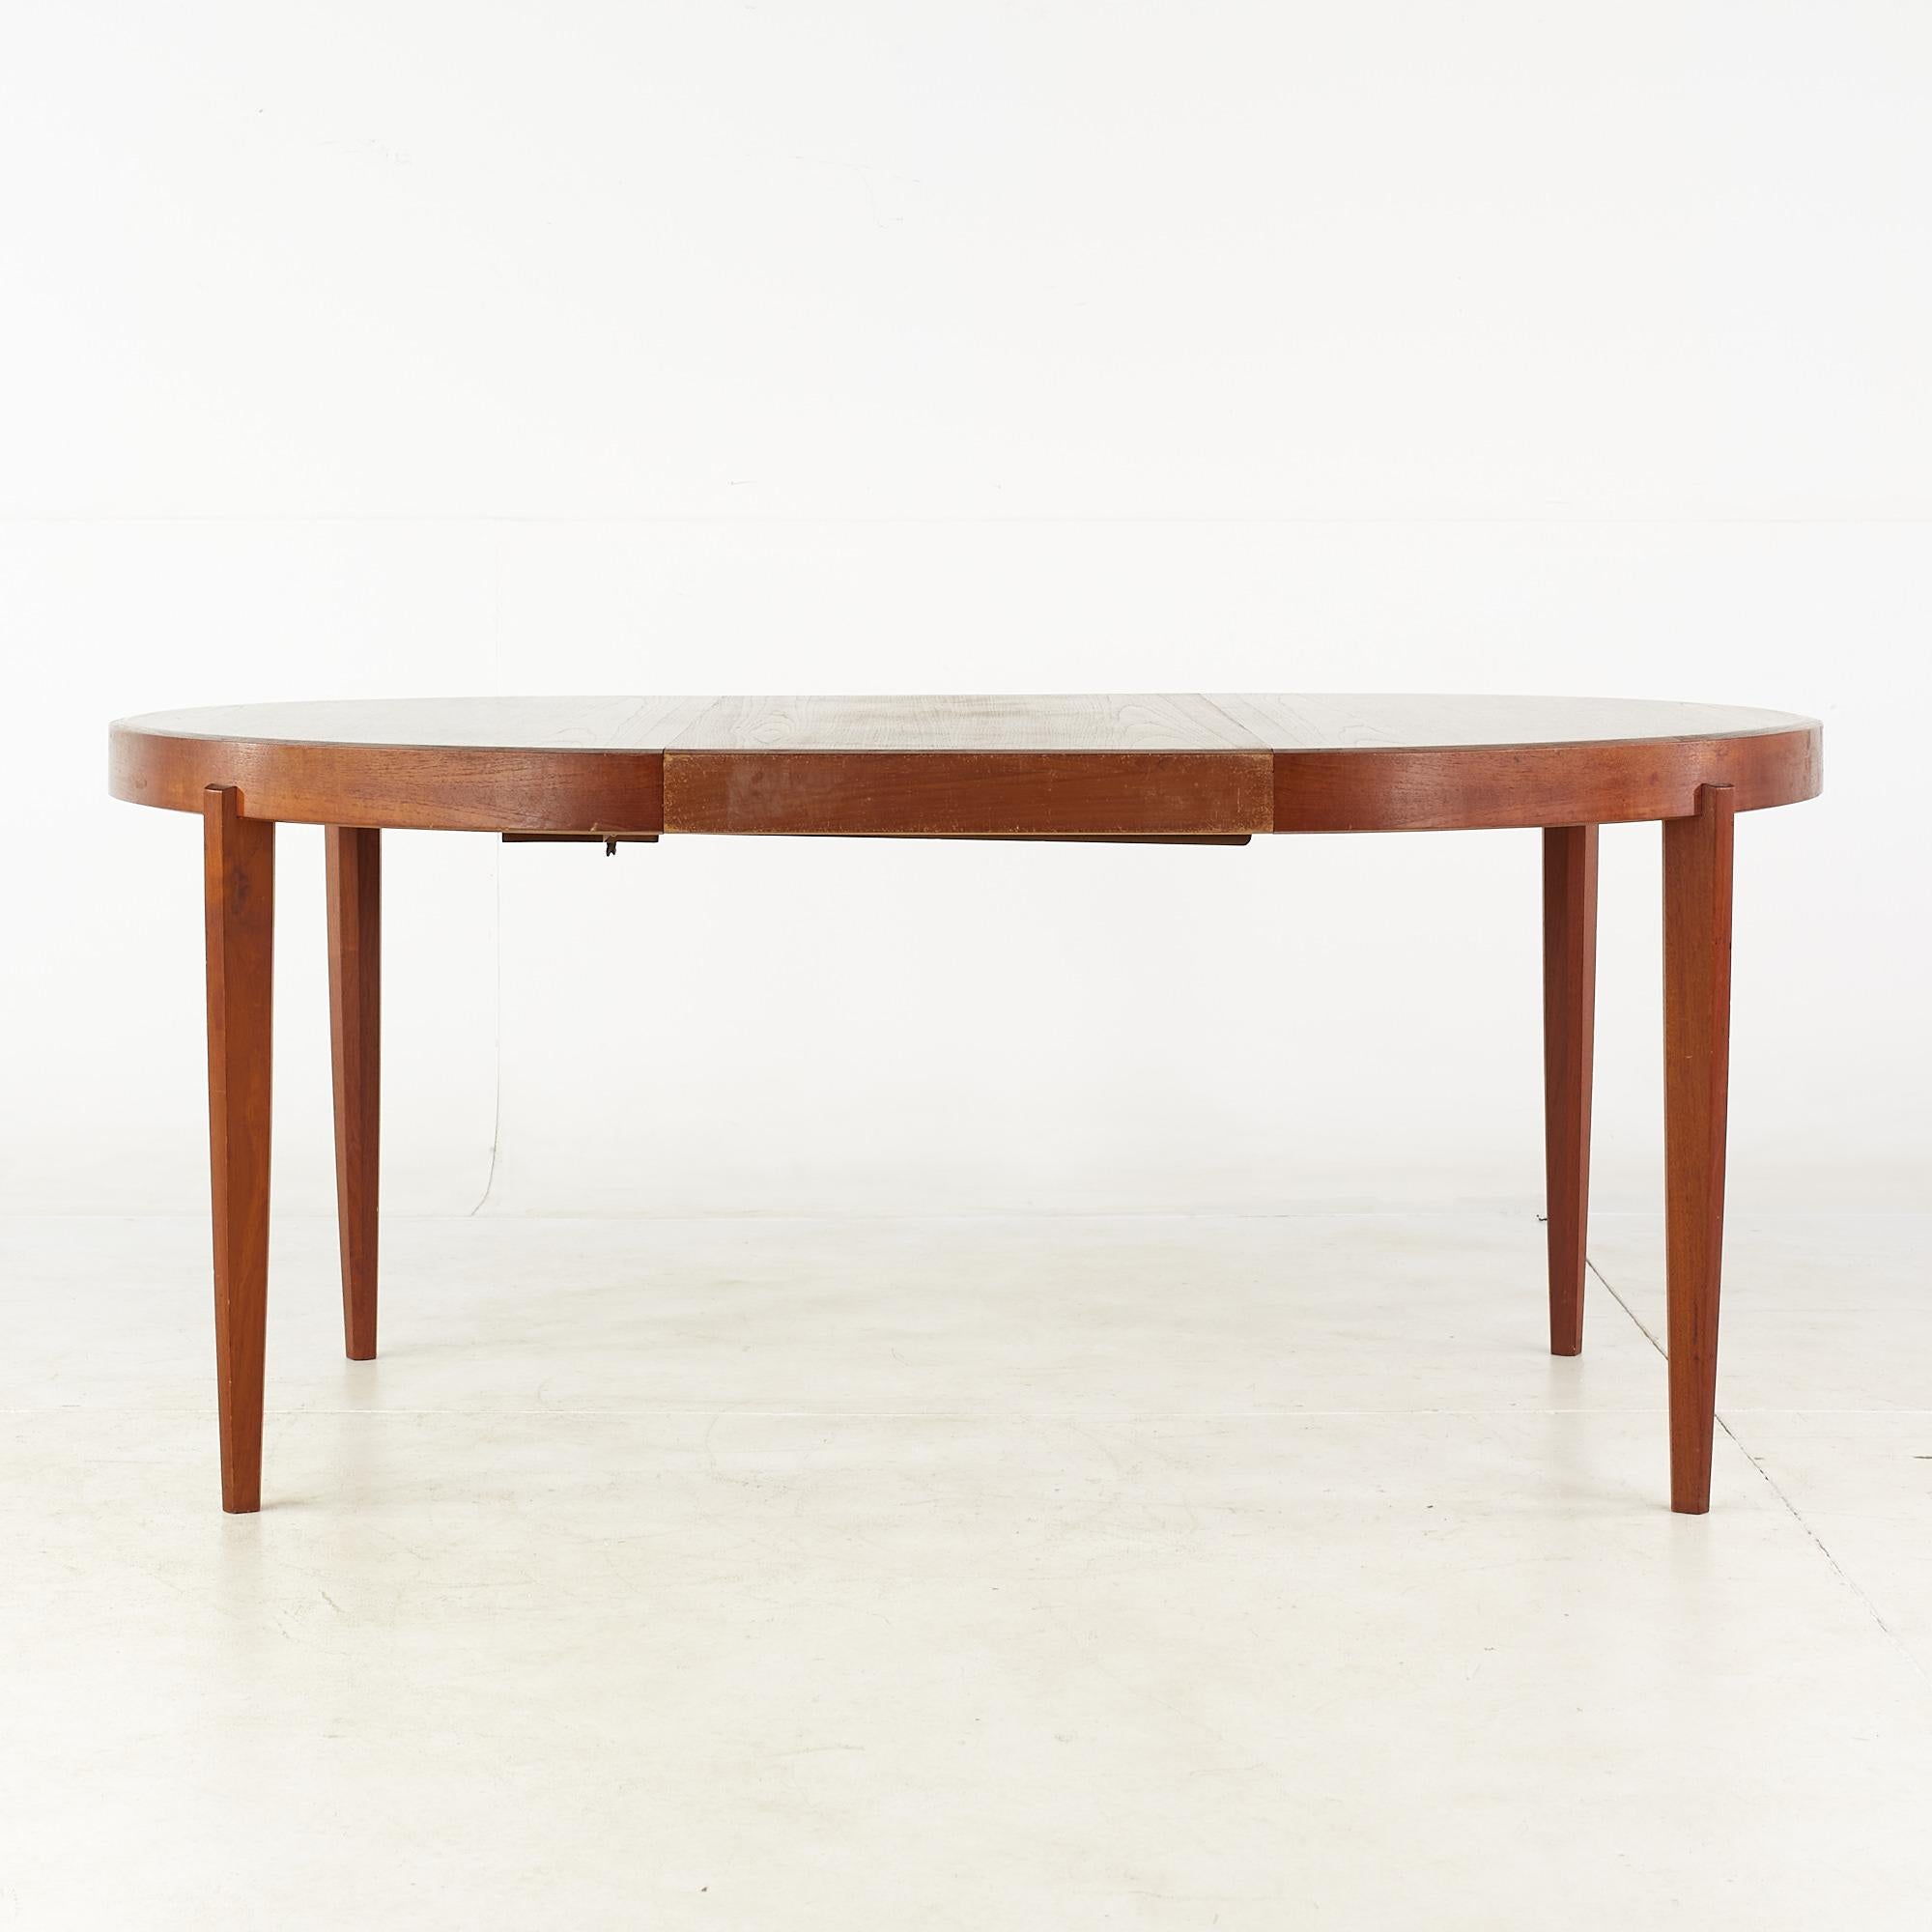 Johannes Andersen Style Mid-Century Teak Expanding Dining Table with 4 Leaves 1